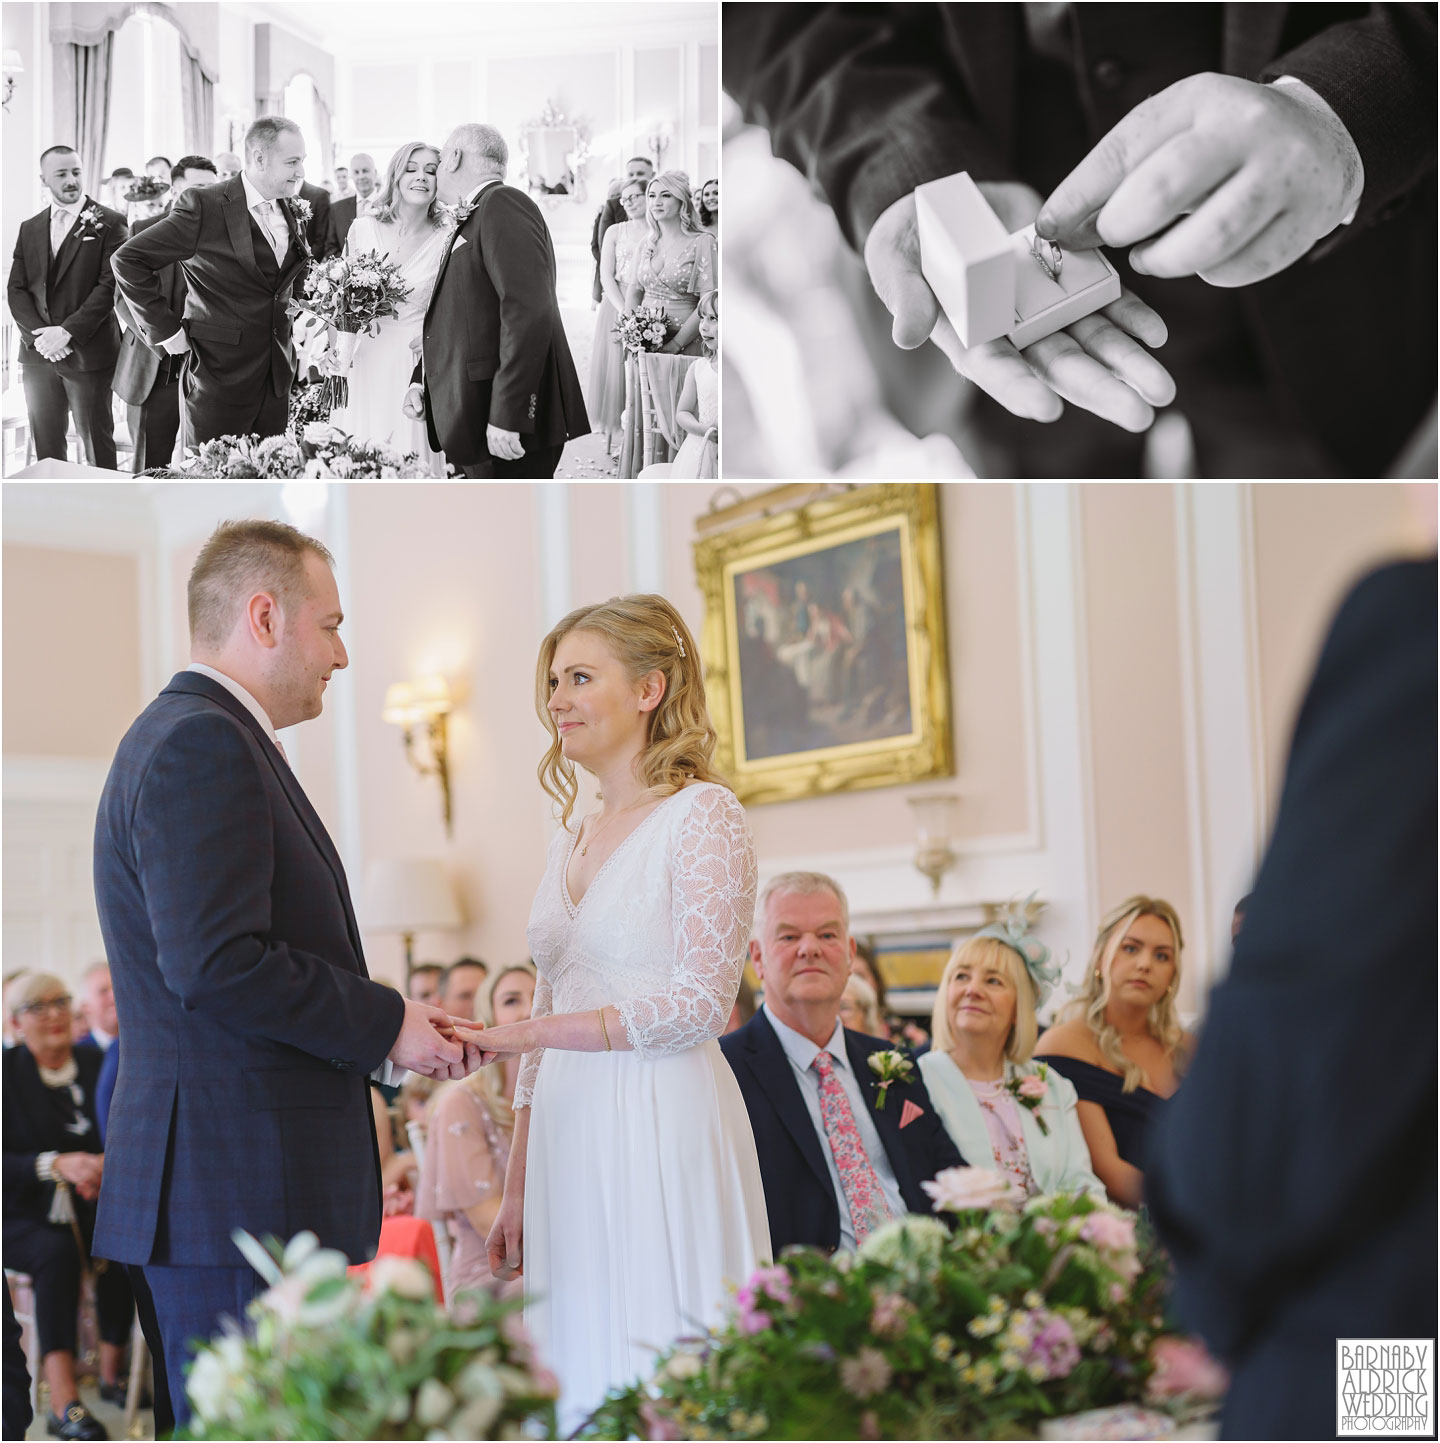 Civil Wedding ceremony photos at Bowcliffe Hall in Yorkshire